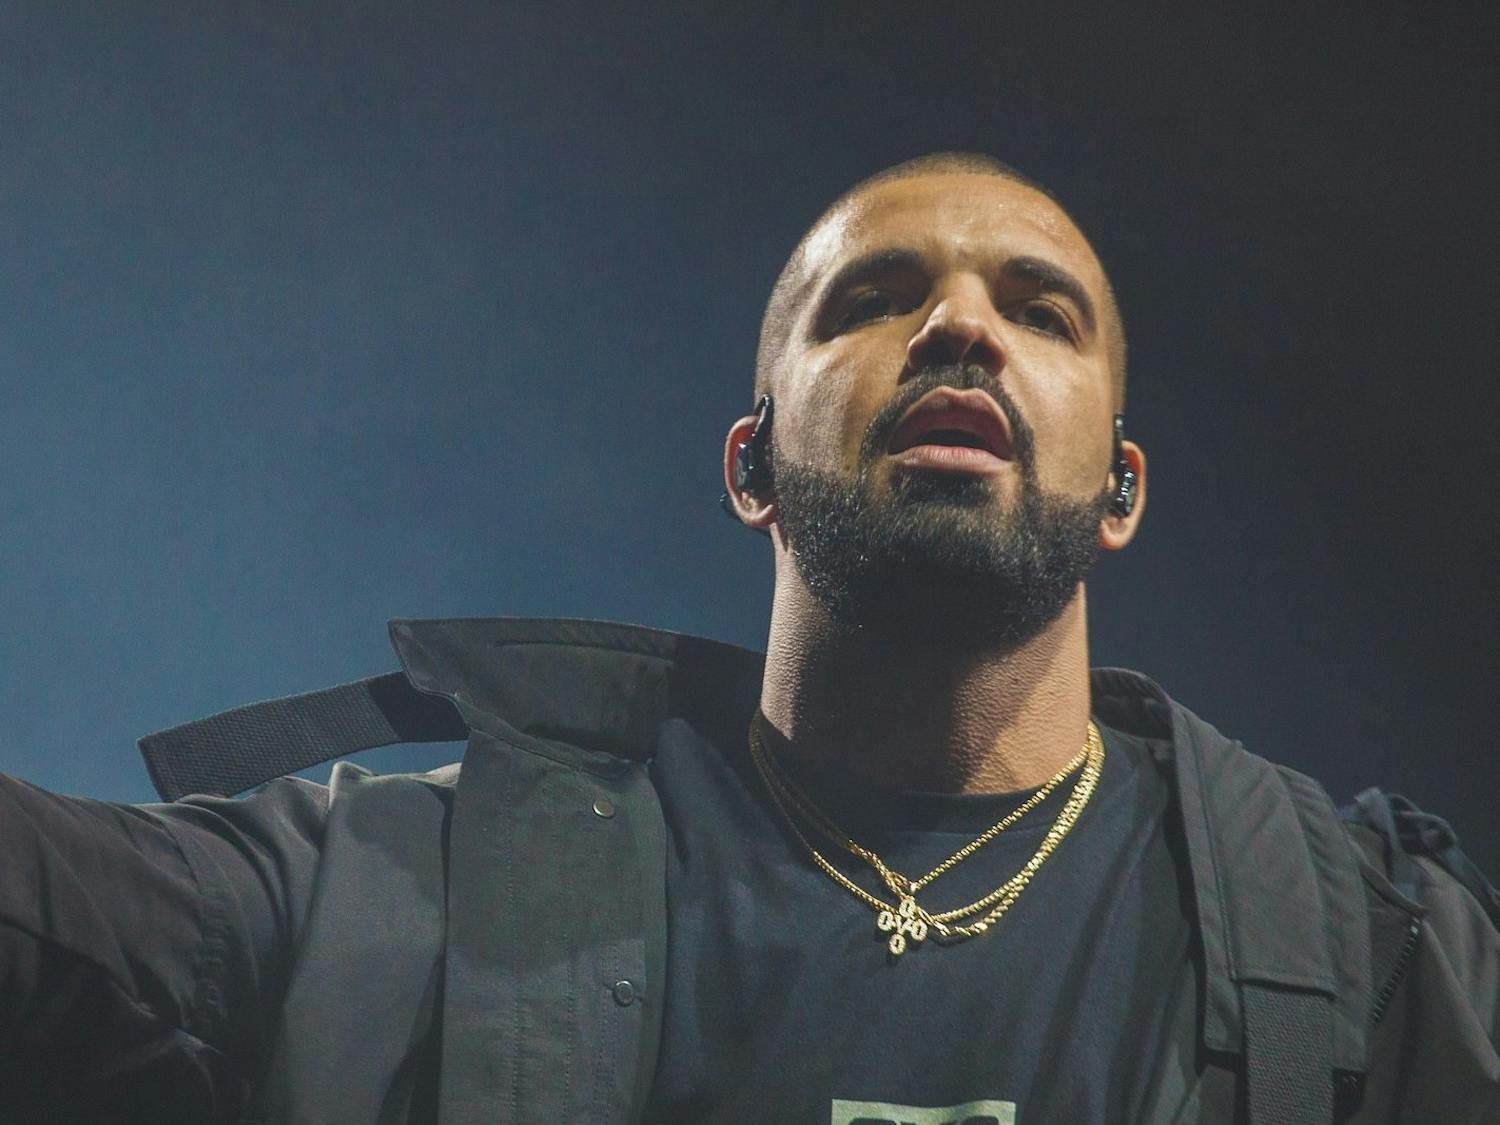 Canadian rapper Drake performs in Summer Sixteen Tour 2016 in Toronto.
